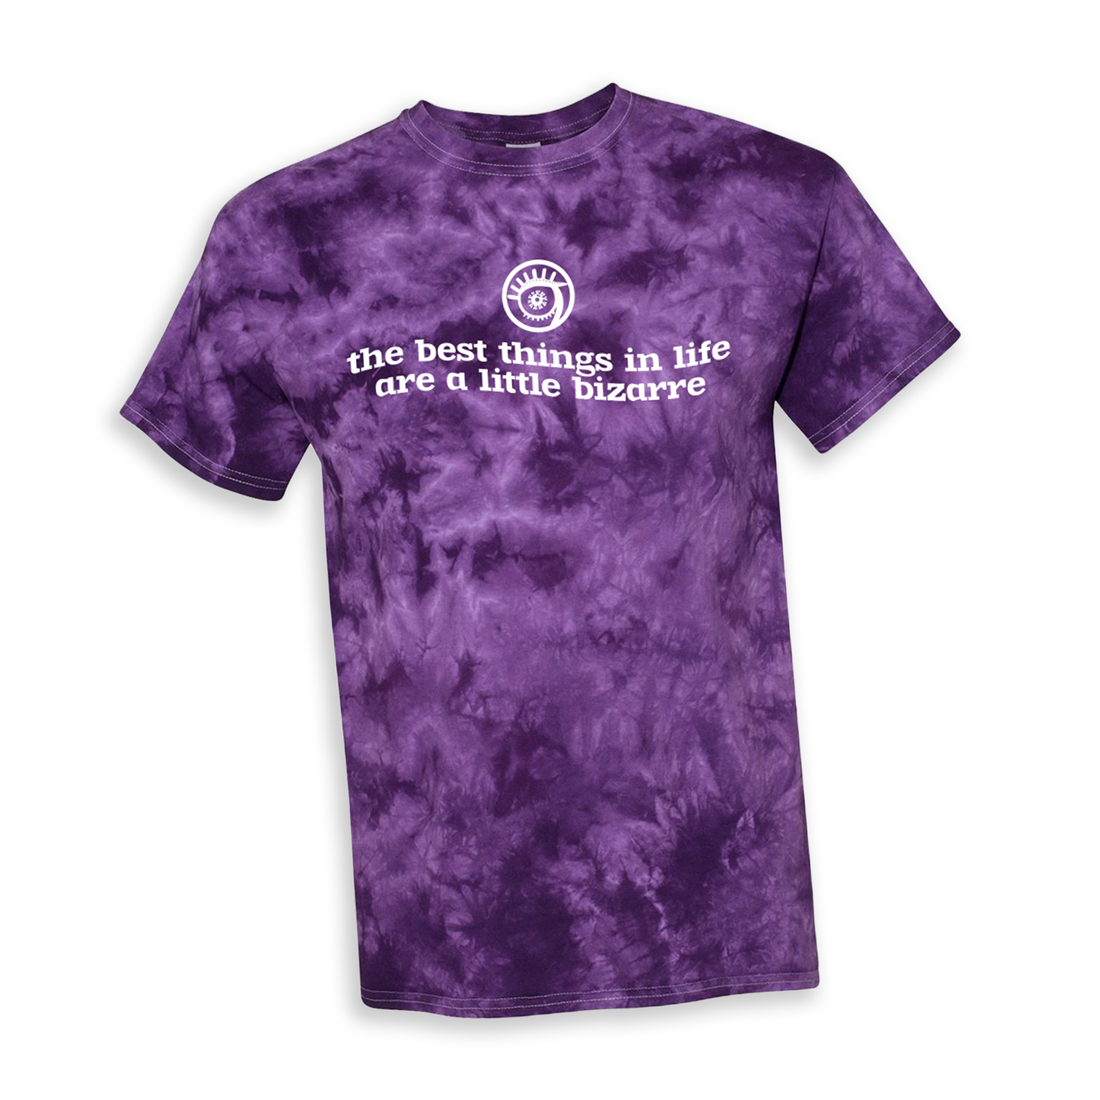 A purple tie-dye t-shirt that has the Bizarre Coffee logo and says &quot;the best things in life are a little bizarre.&quot;